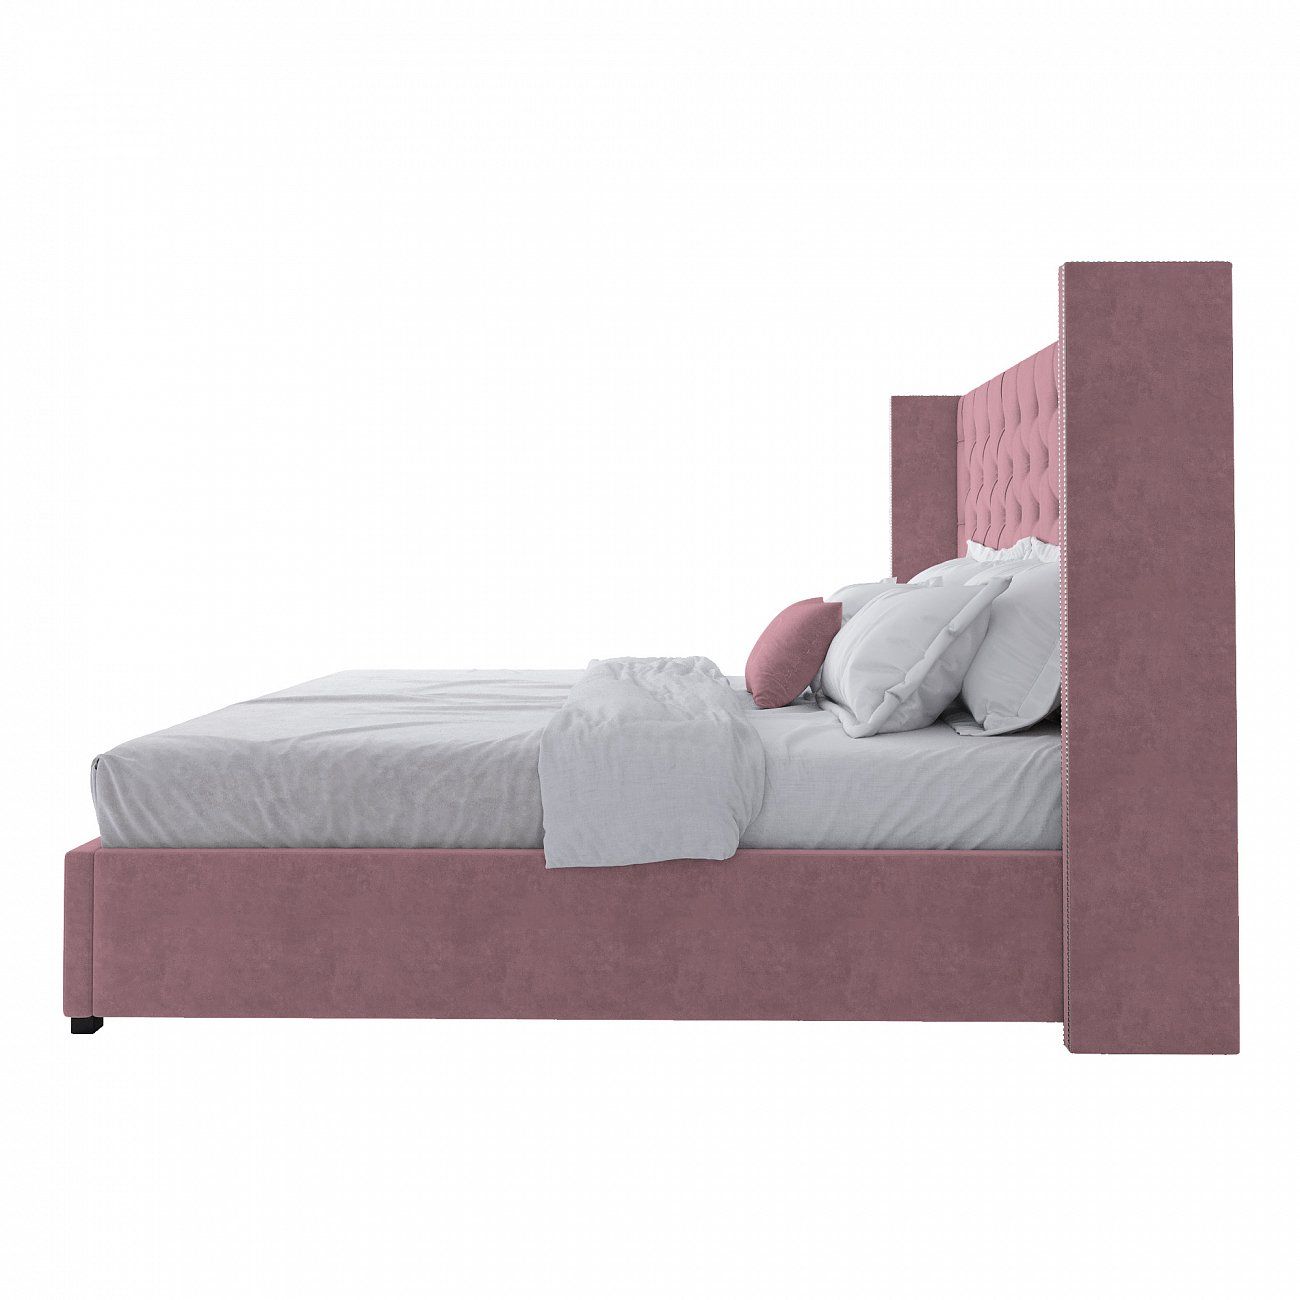 Double bed 200x200 cm dusty Rose with carnations and Carriage screed Wing